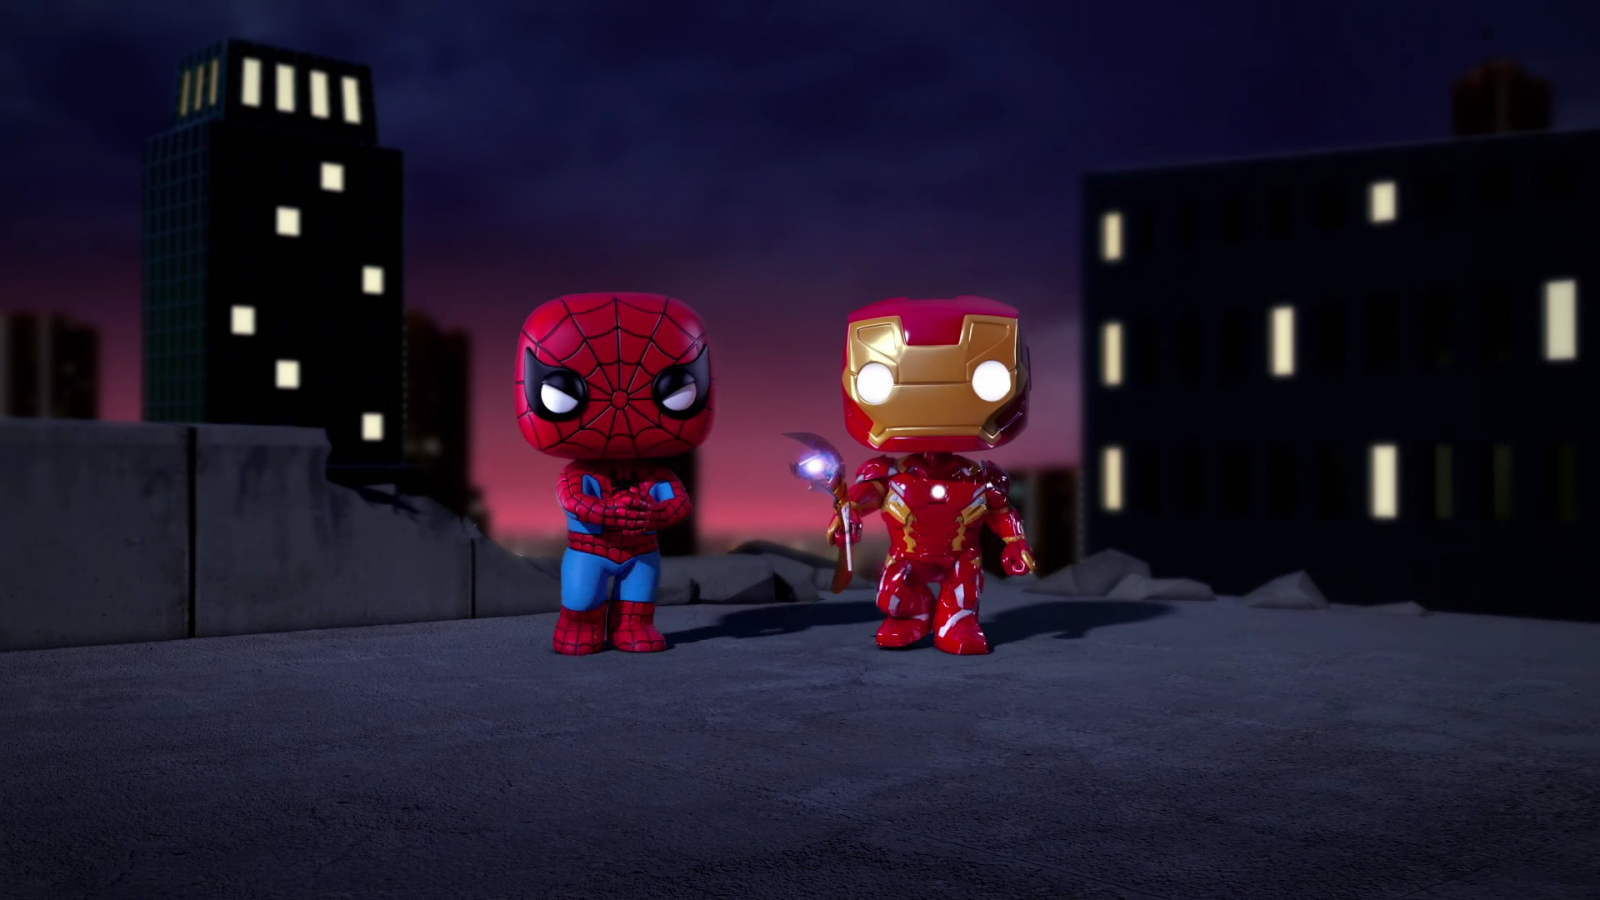 Desktop Wallpaper Iron Man And Spiderman Spellbound Animated Movie, HD Image, Picture, Background, Si Gus